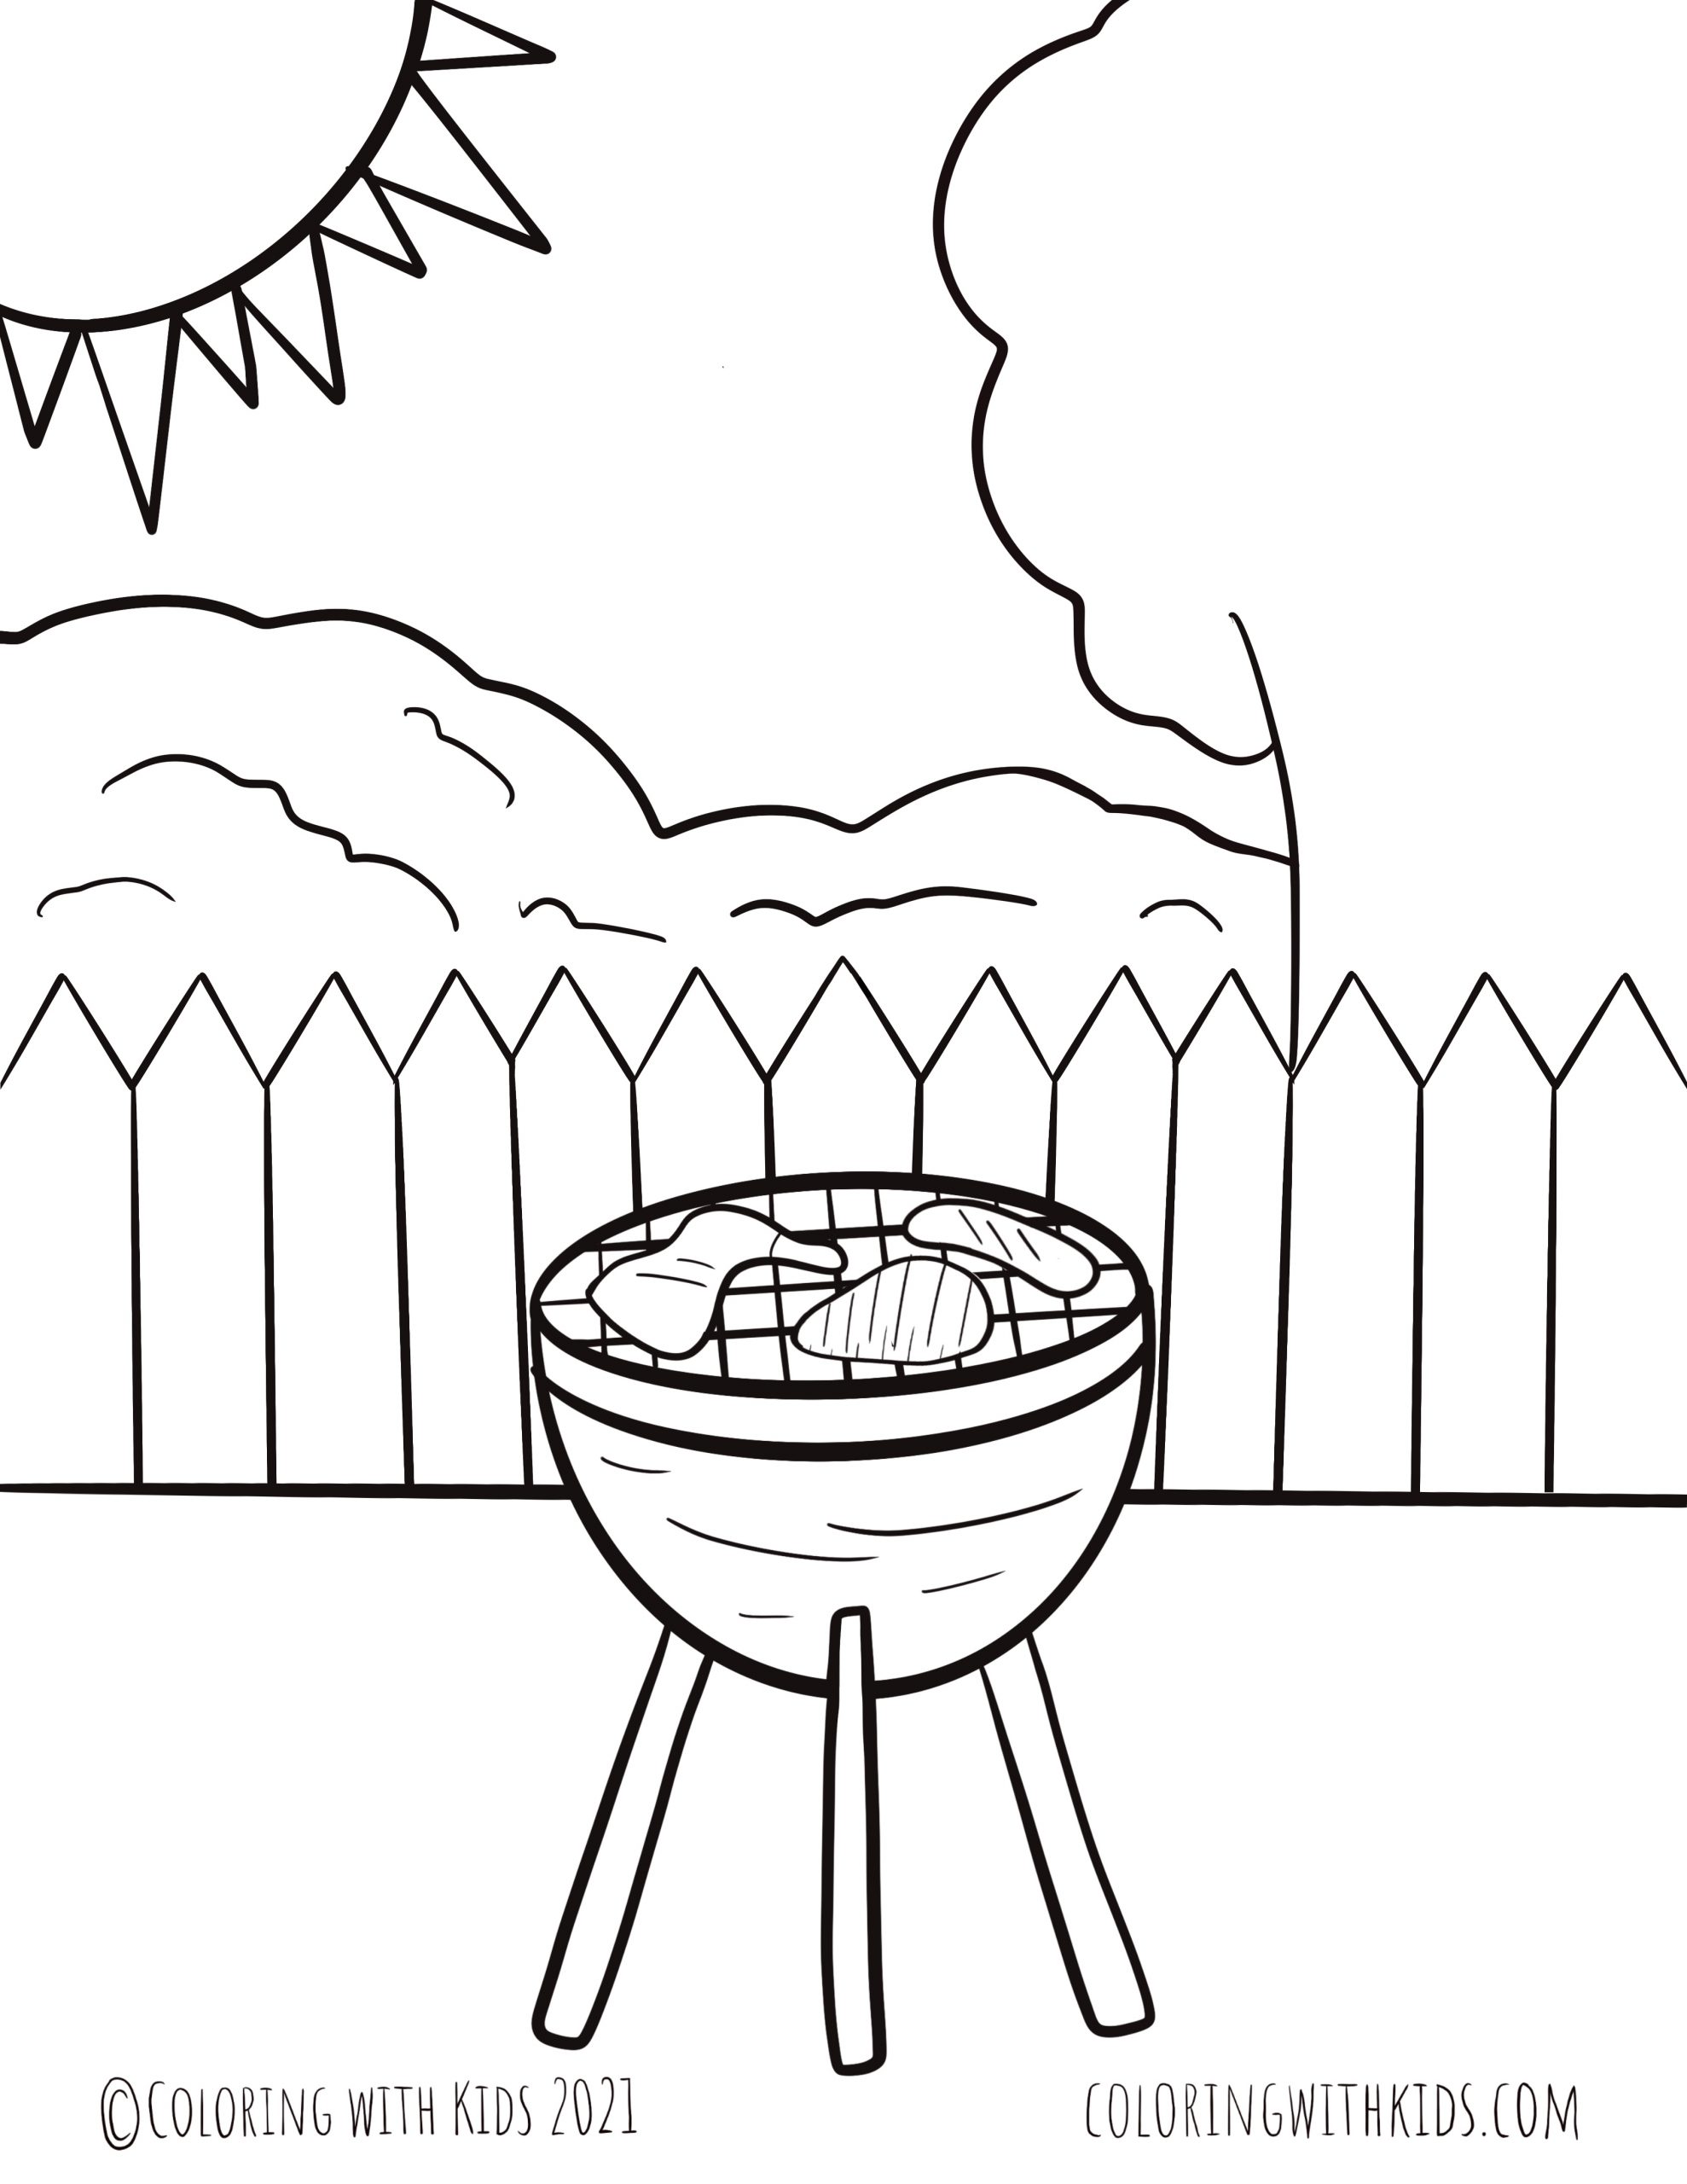 Summer Activity Coloring Page - Coloring with Kids